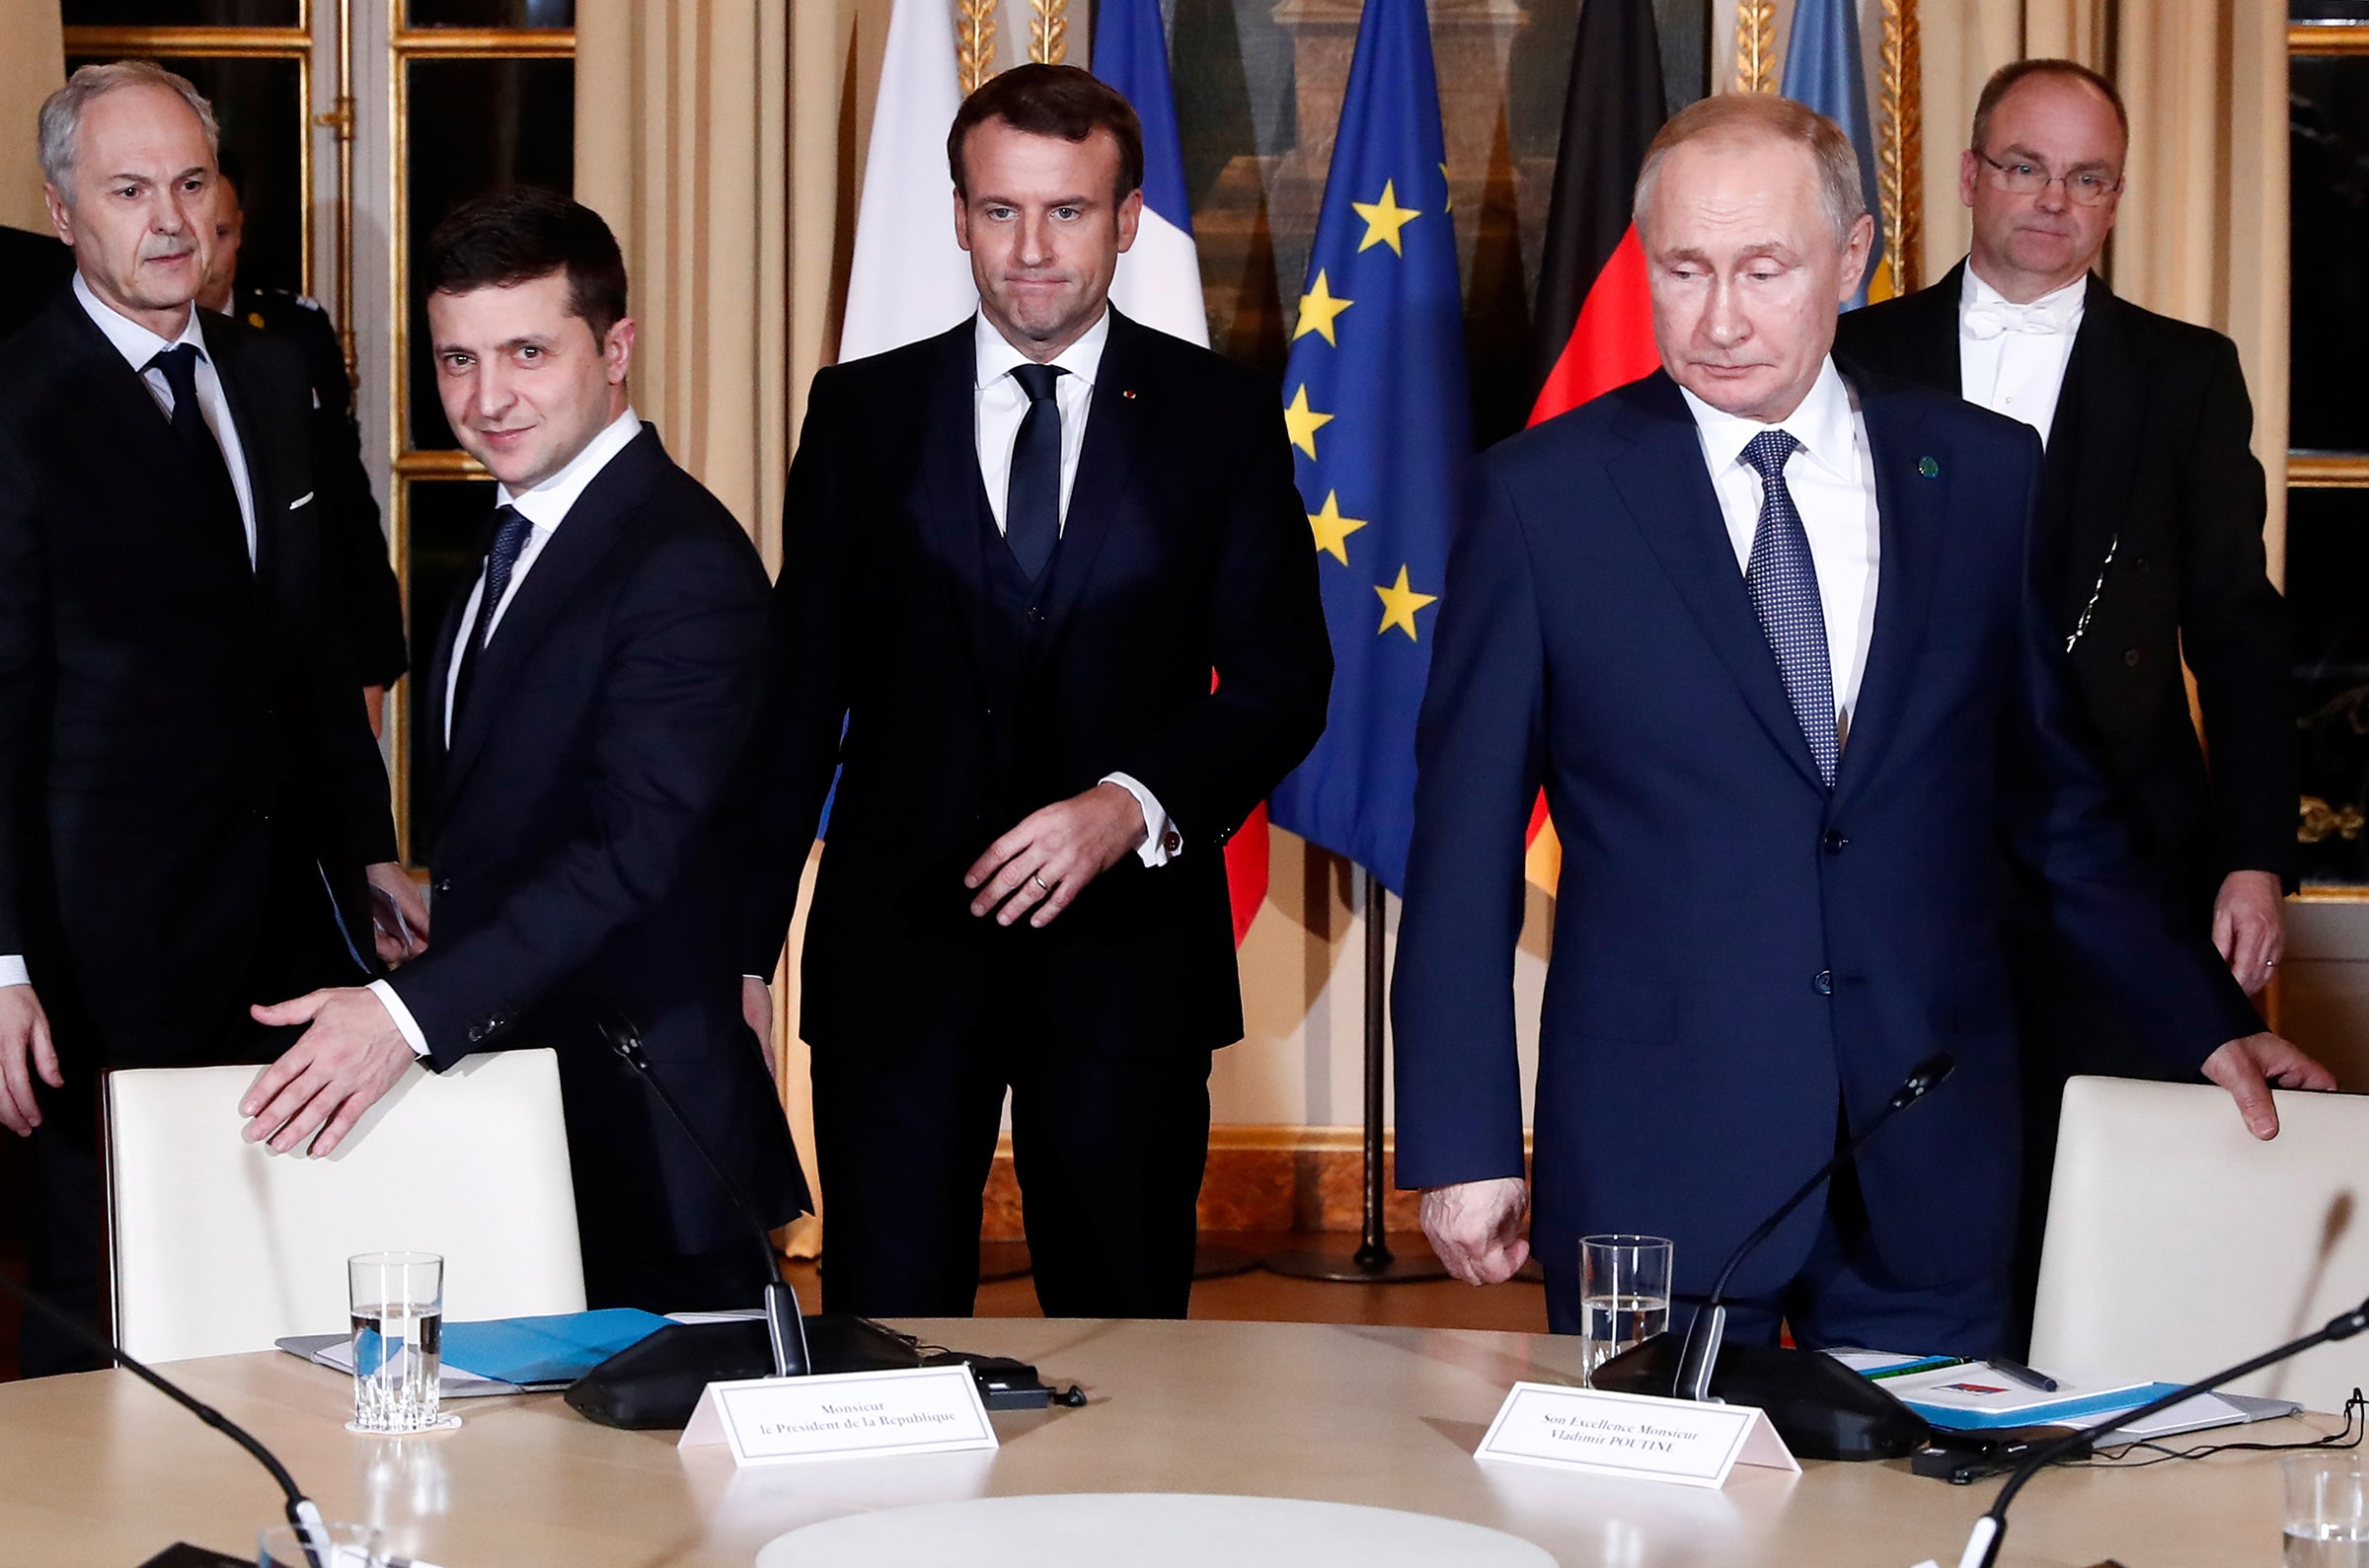 Five men, including Volodymyr Zelensky, Emmanuel Macron and Vladimir Putin, in front of a round table